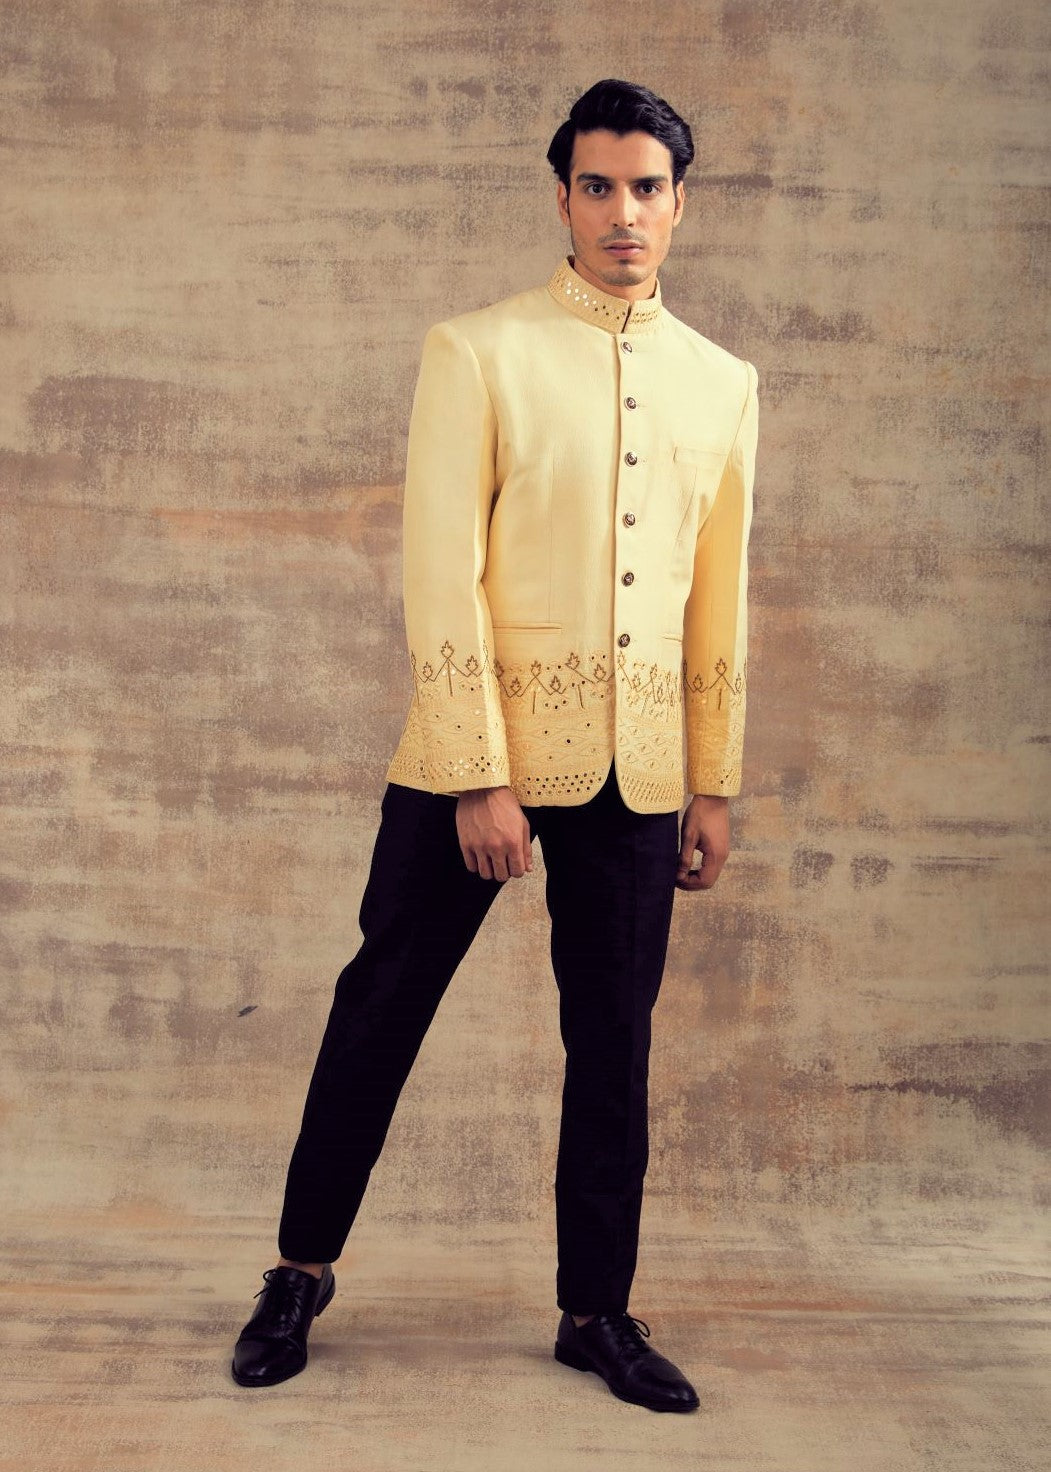 Hand Embroidered Floral Pattern Jodhpuri Bandhgala jacket With  Hand-Enameled Buttons at Rs 14999 | Bandhgala suit in Yamuna Nagar | ID:  2851266268833